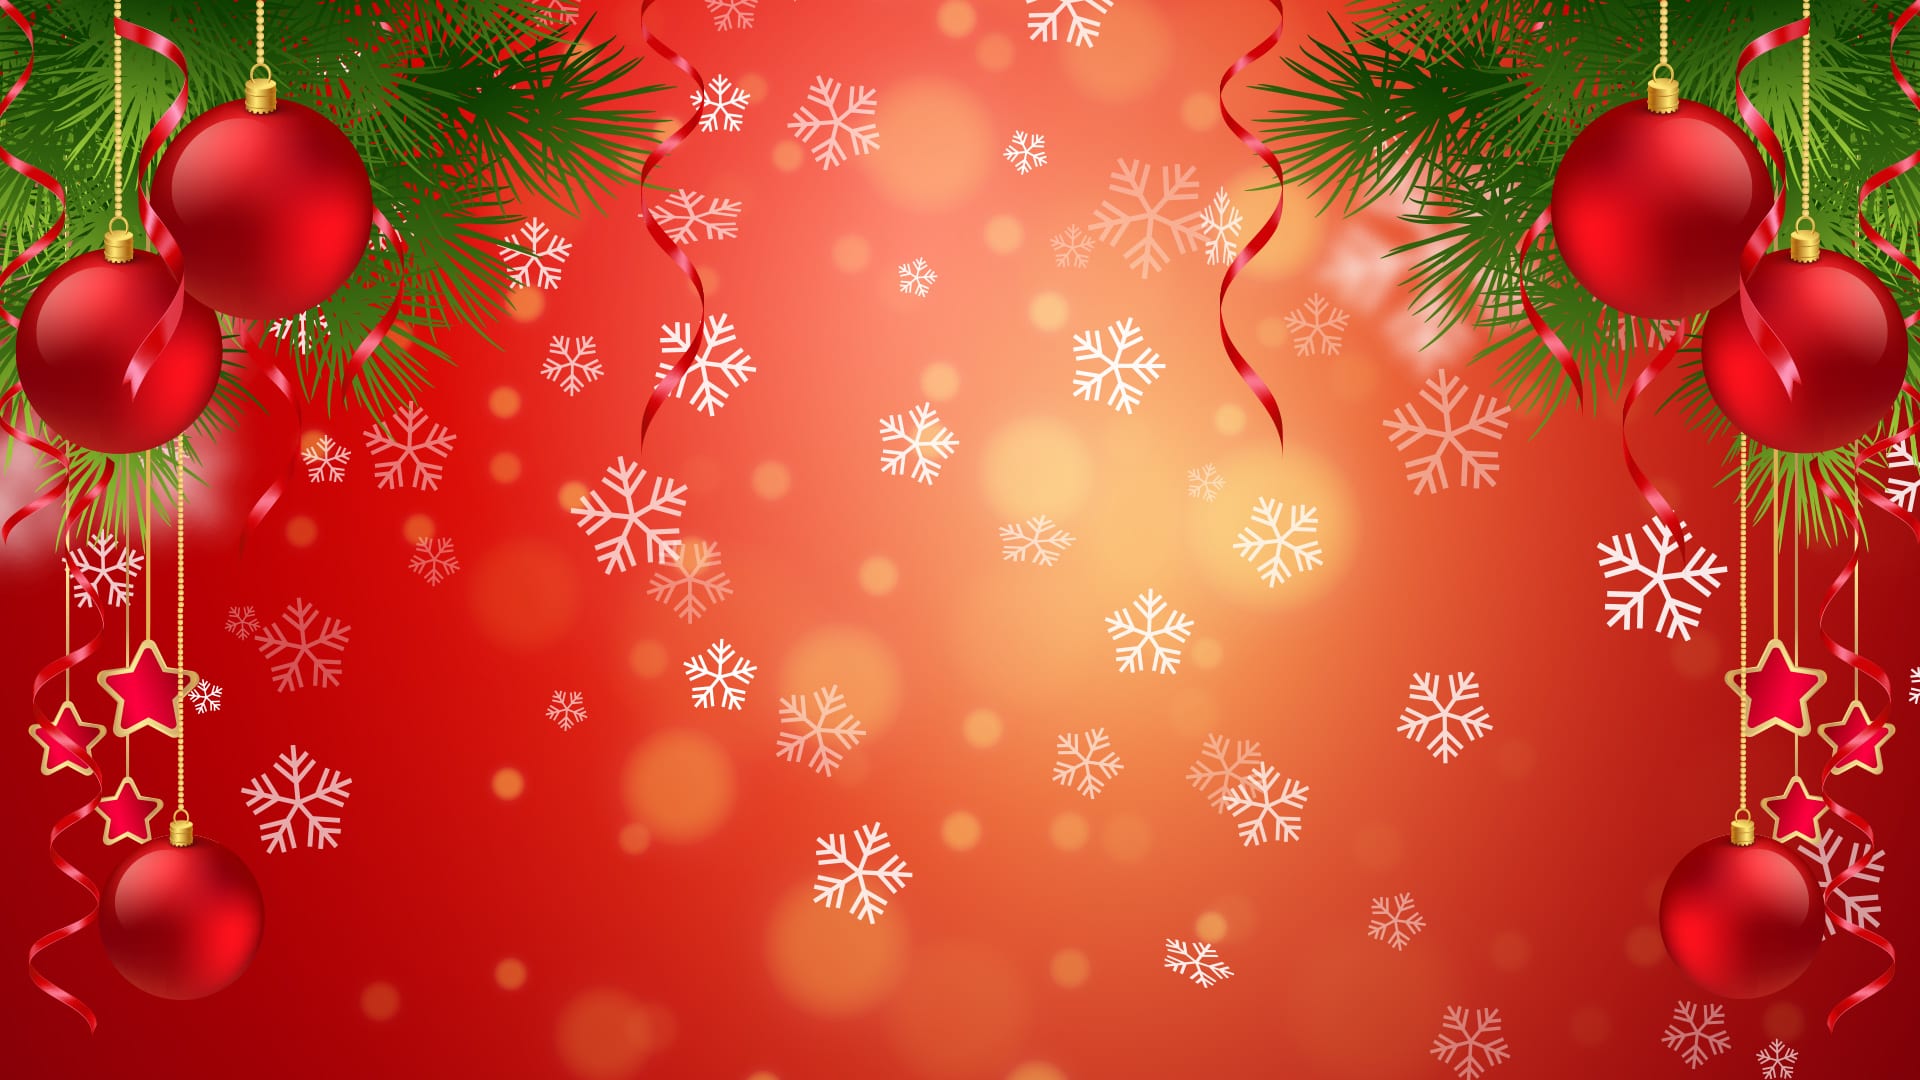 20 Beautiful Christmas Wallpapers and Backgrounds in Full ...